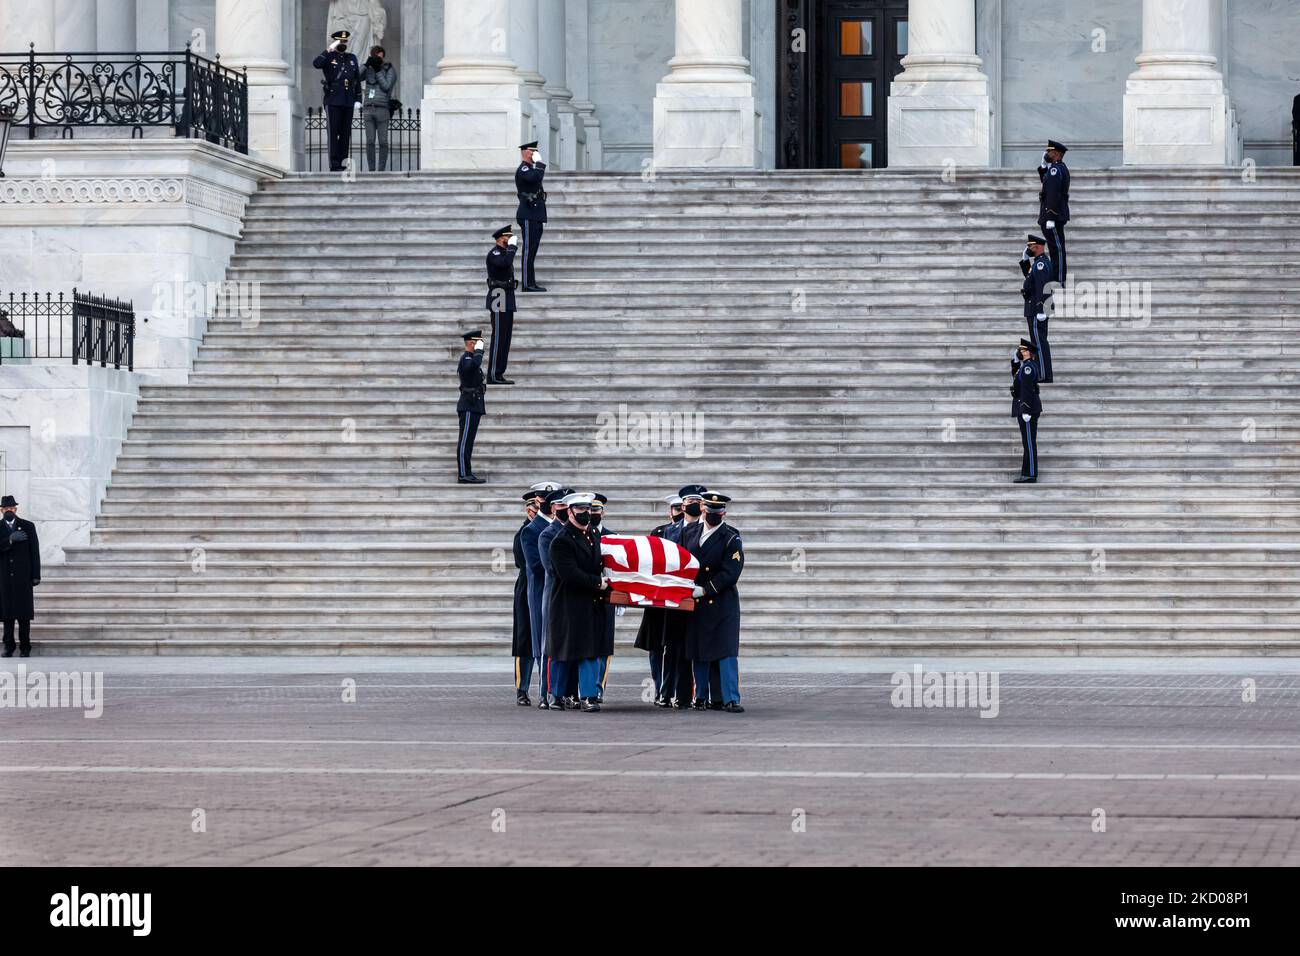 A military honor guard carries the remains of Harry Reid out of the Capitol, after lying in state in the rotunda. A Capitol Police honor guard salutes on the east front center steps. Reid was a Nevada Democrat who served in the House of Representatives from 1983-1987. He was a Senator from 1987-2017, and alternately served as Senate Majority and Minority Leader from 2005-2017. (Photo by Allison Bailey/NurPhoto) Stock Photo